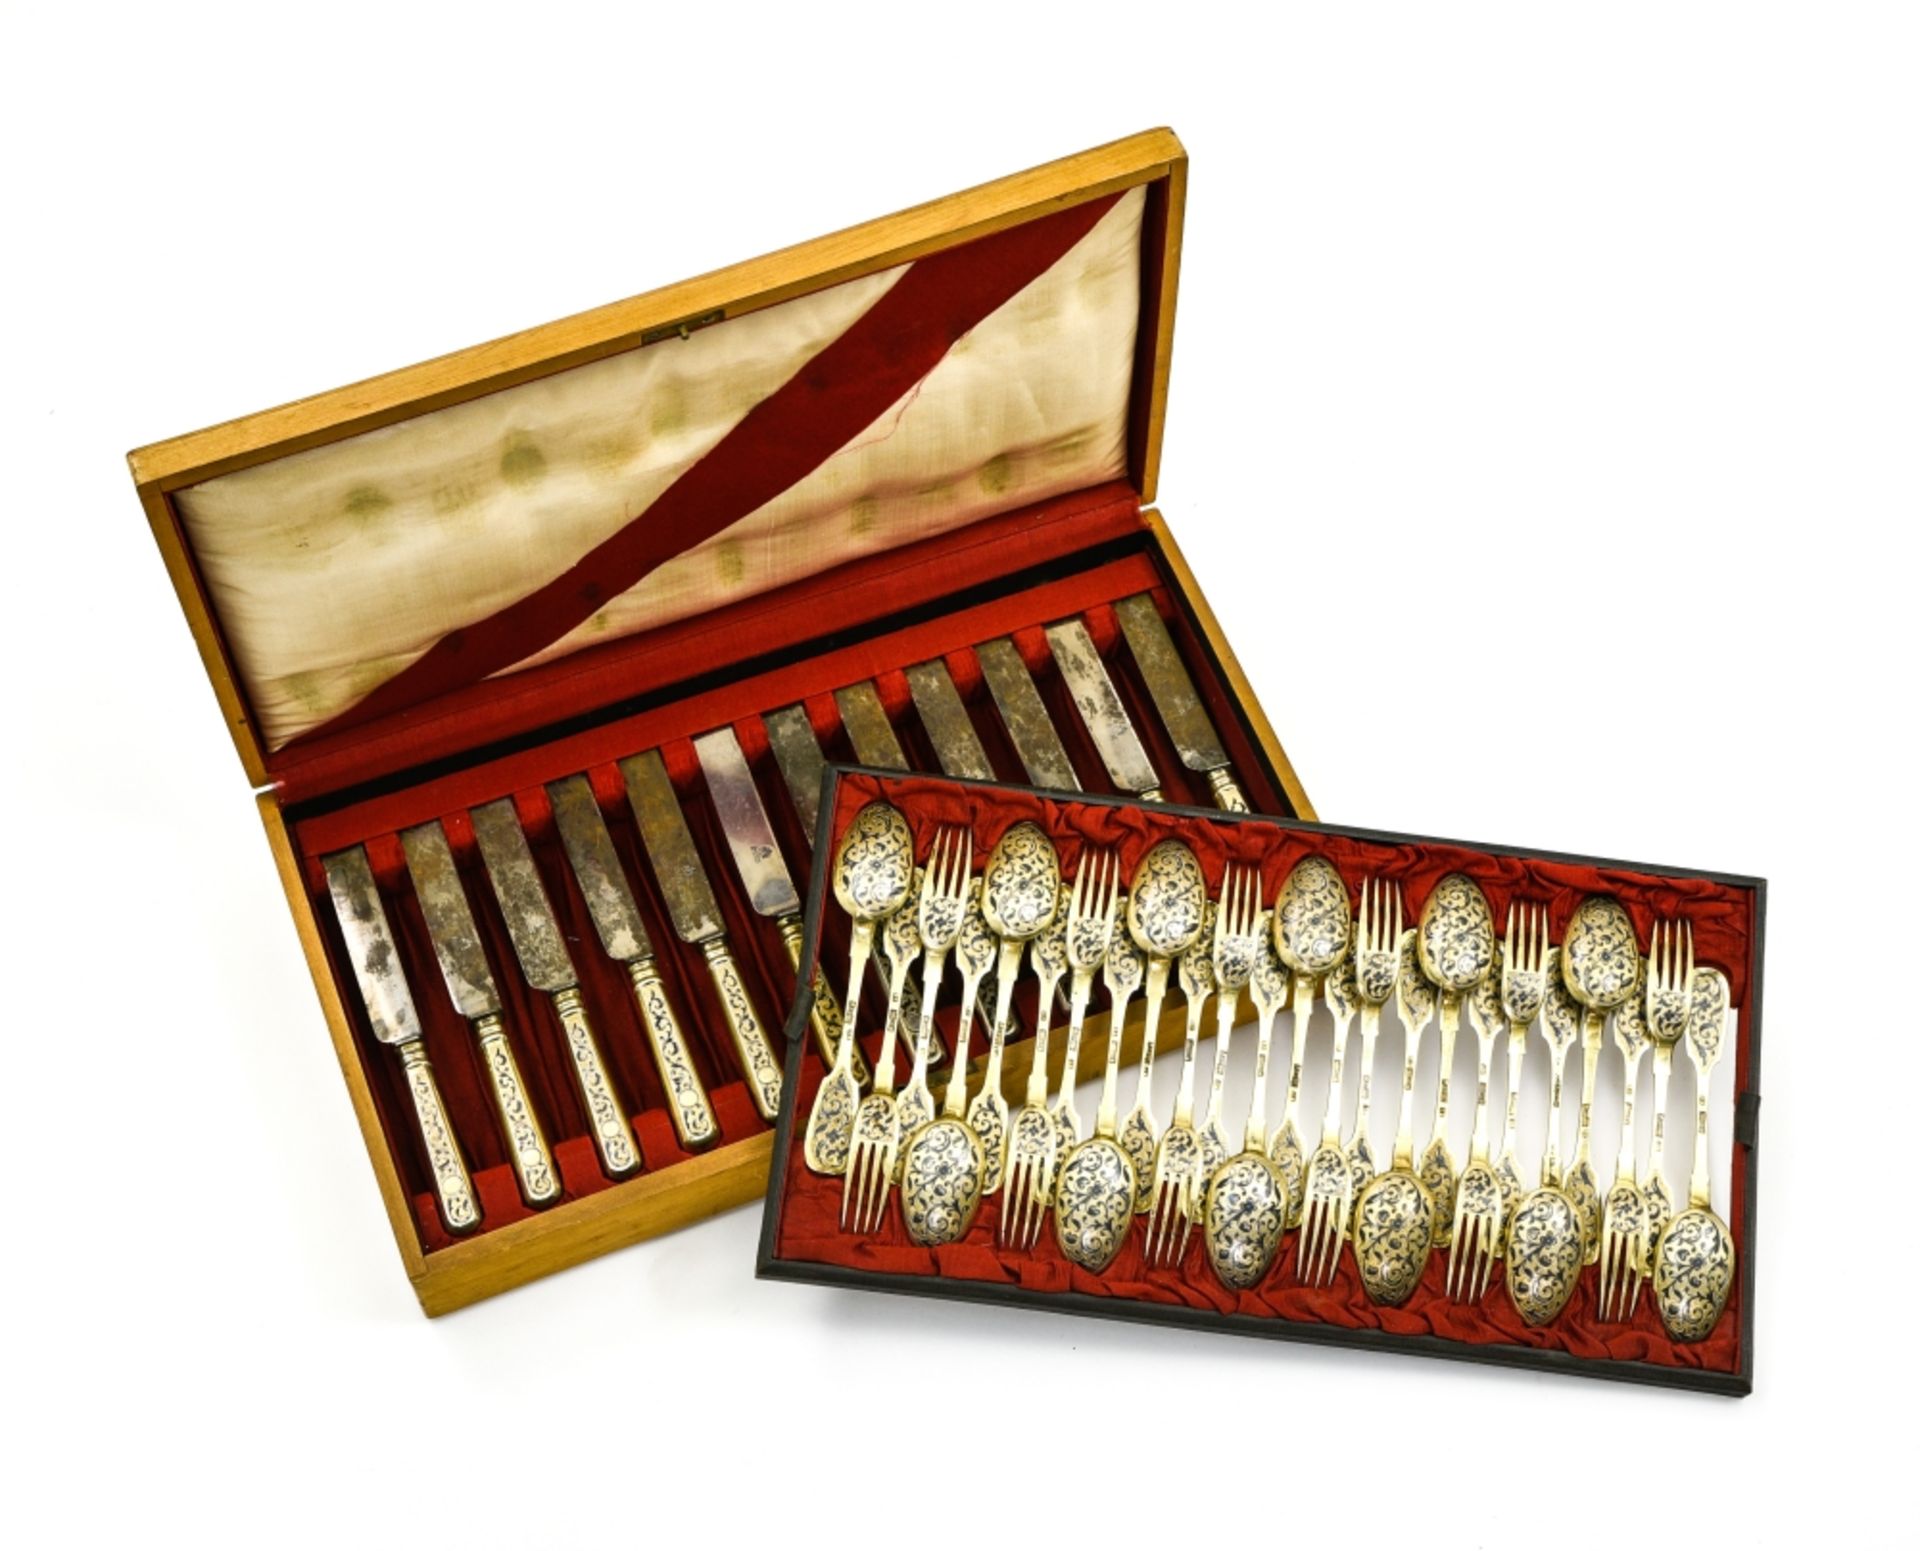 Part of a cutlery set MOSCOW, 1883 niello vermeil, composed of 12 knives, 12 forks, and 12 spoons.